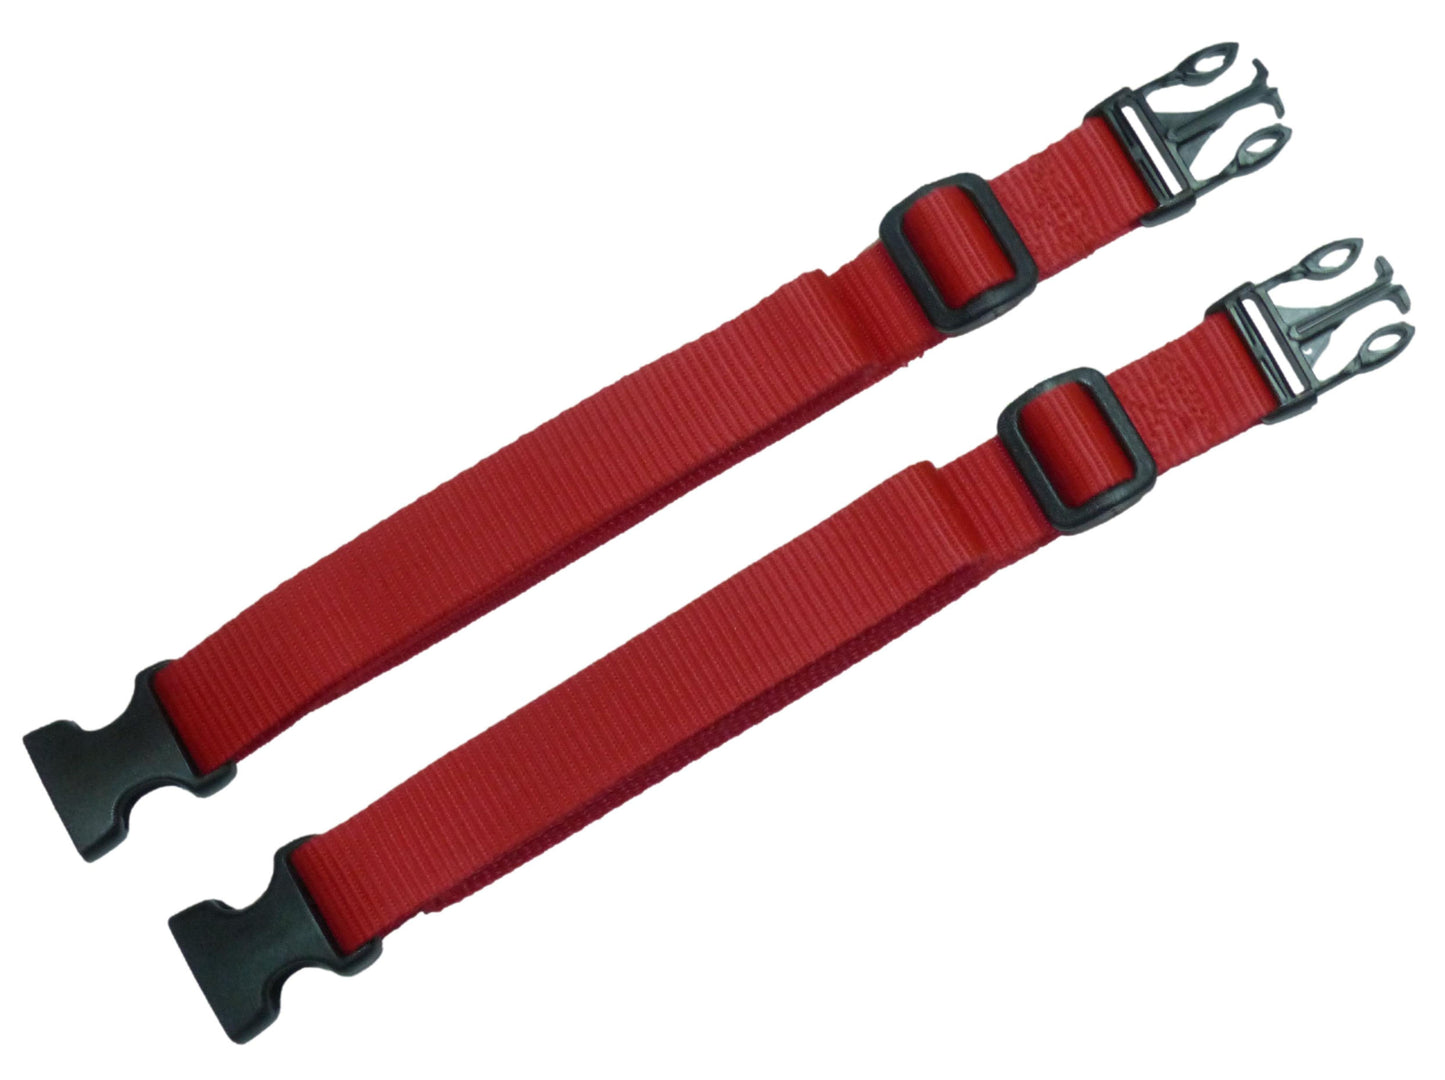 25mm Webbing Strap with Quick Release & Length-Adjusting Buckles (Pair) in red